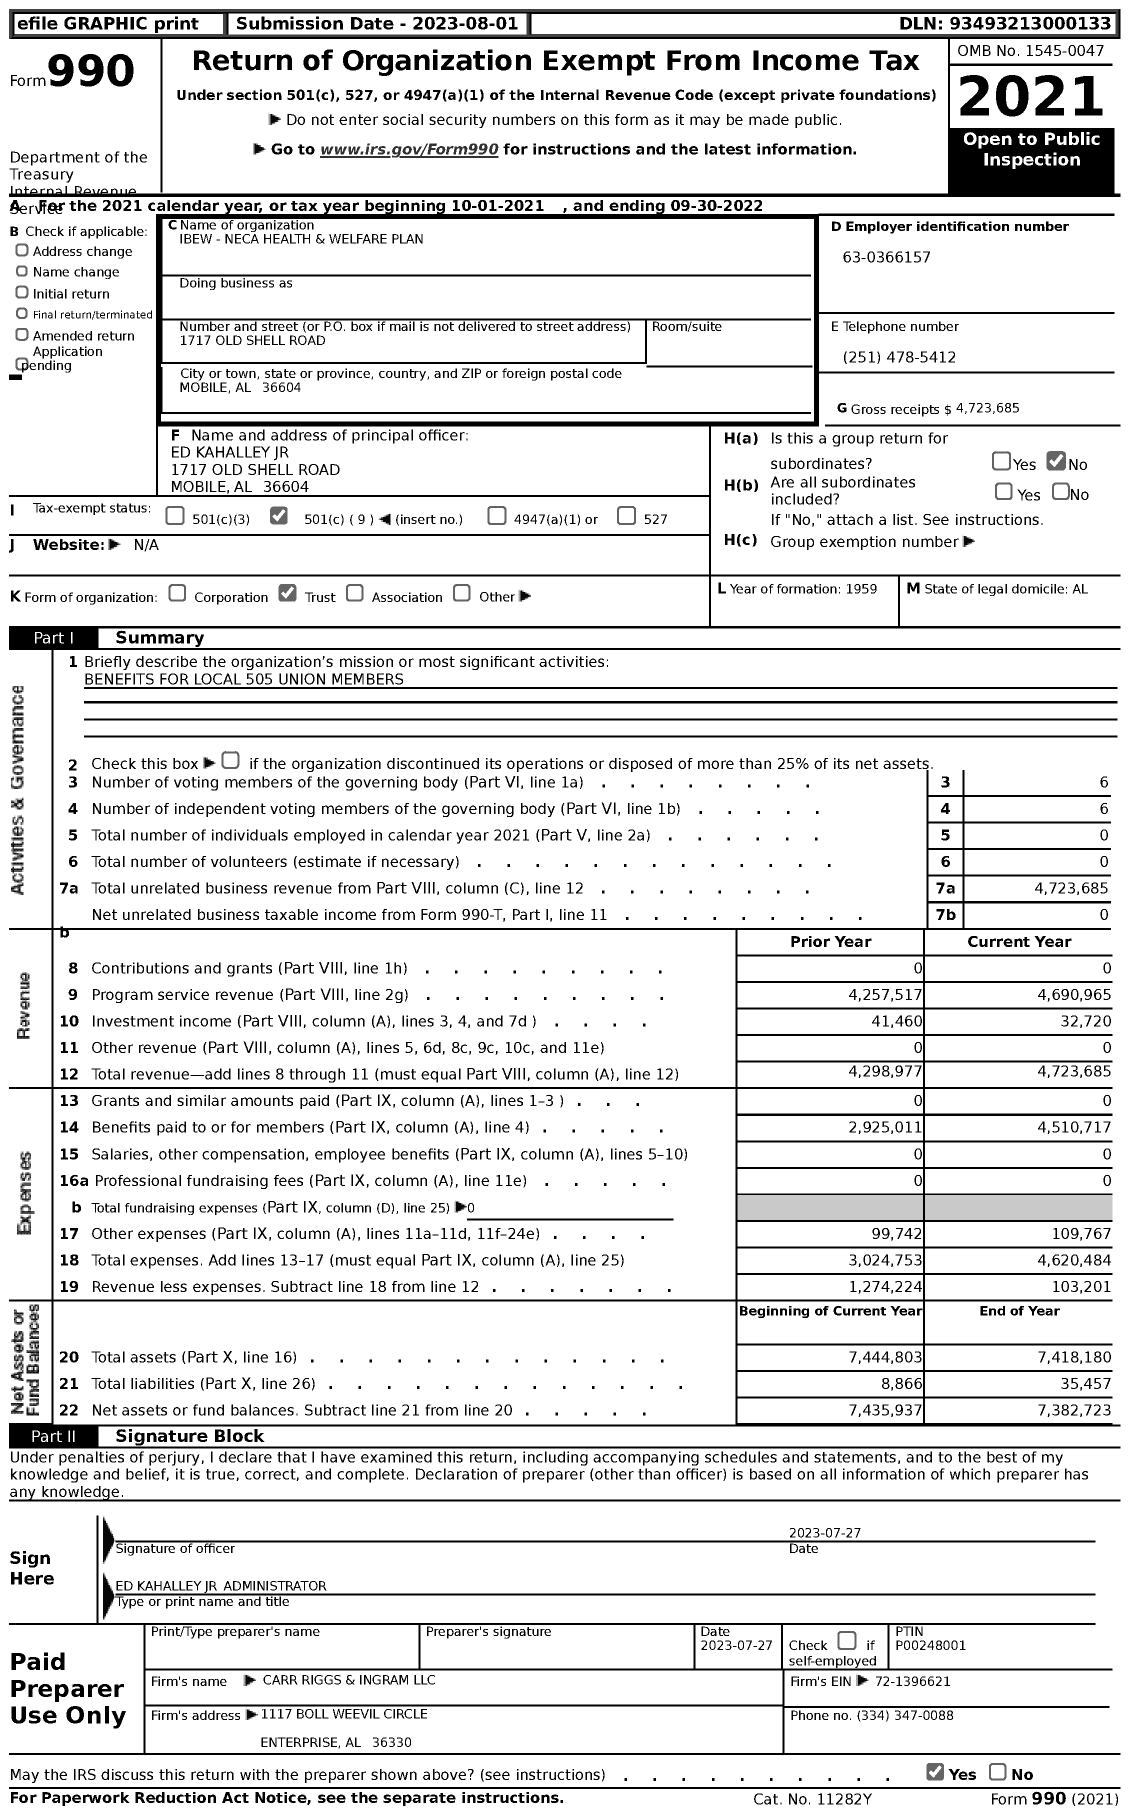 Image of first page of 2021 Form 990 for IBEW - Neca Health and Welfare Plan